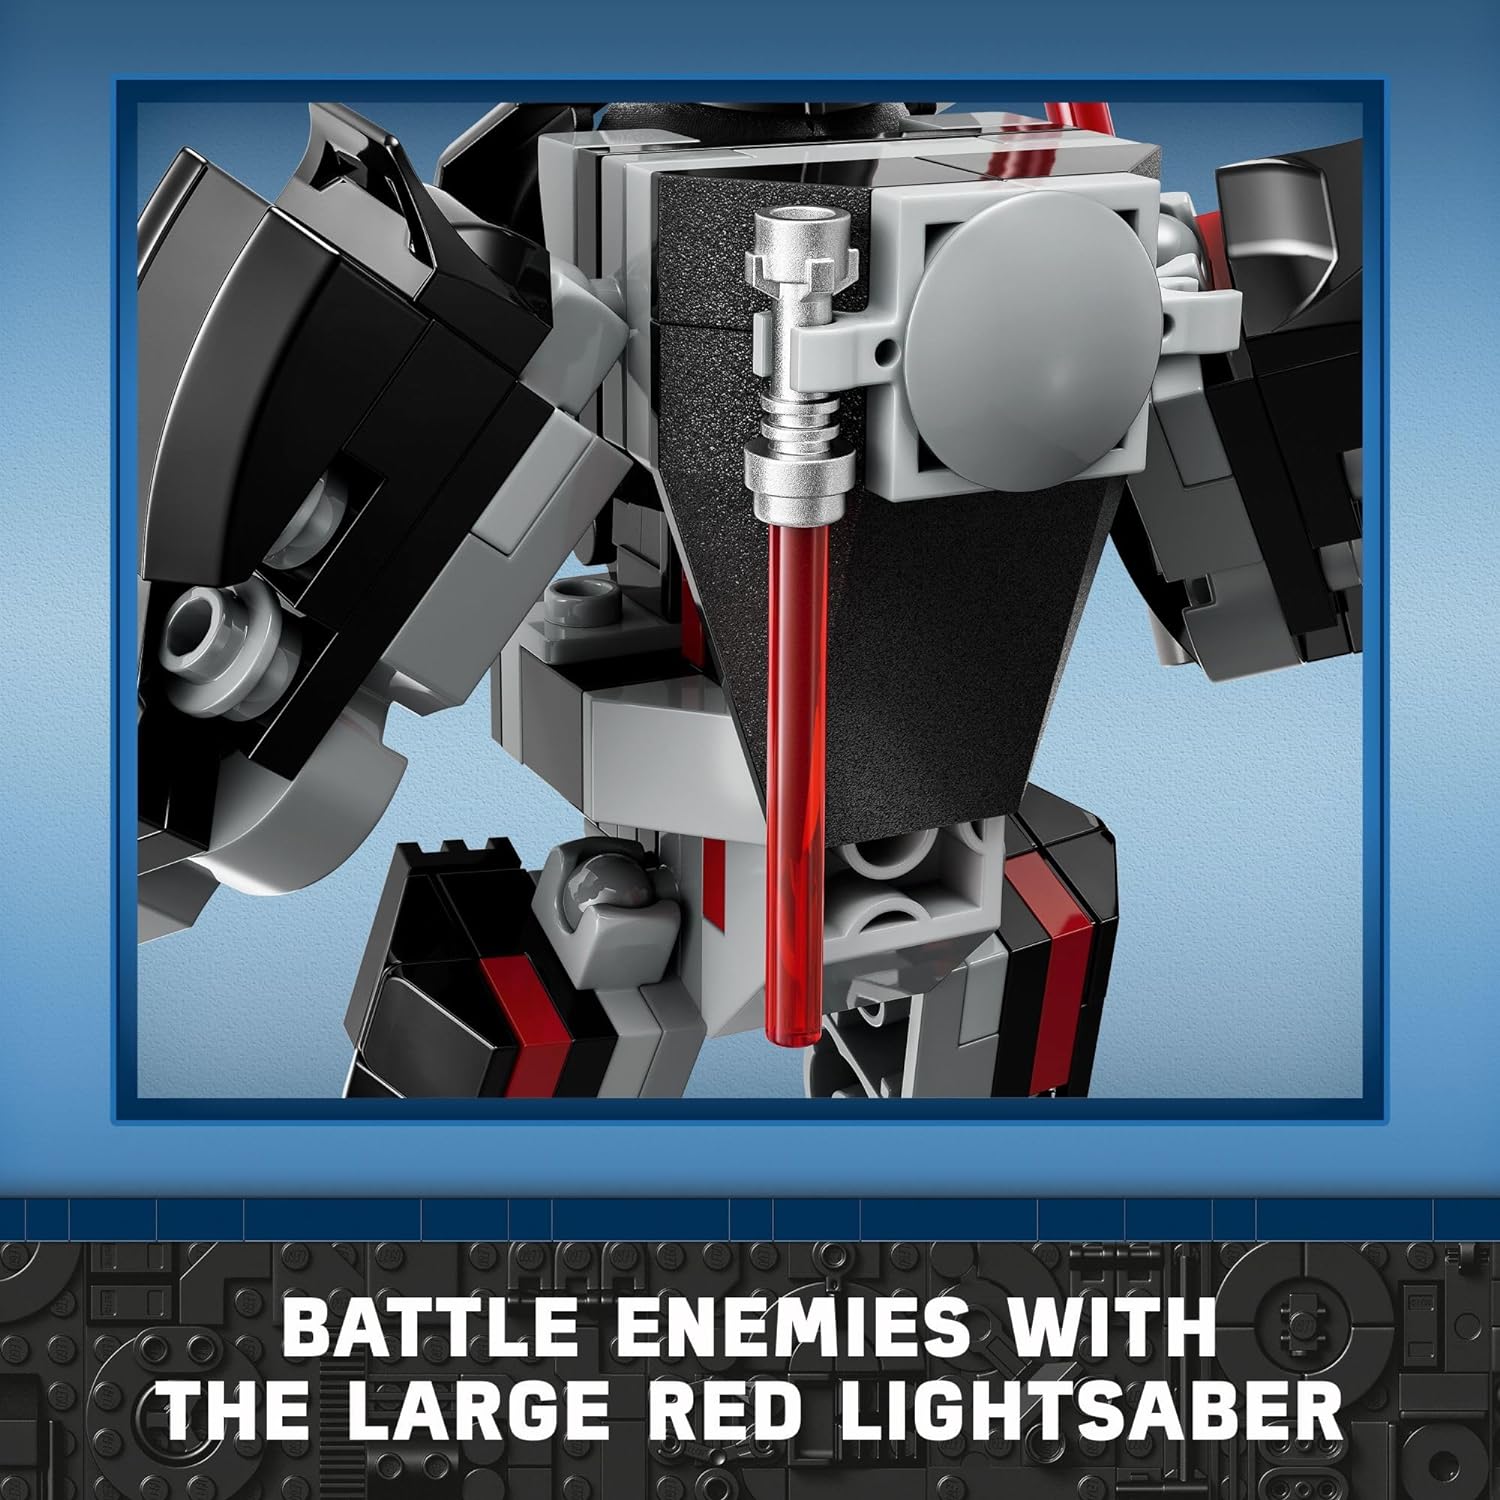 LEGO 75368  Star Wars Darth Vader Mech Buildable Star Wars Action Figure, This Collectible Star Wars Toy for Kids Ages 6 and Up Features an Opening Cockpit, Buildable Lightsaber and 1 Minifigure